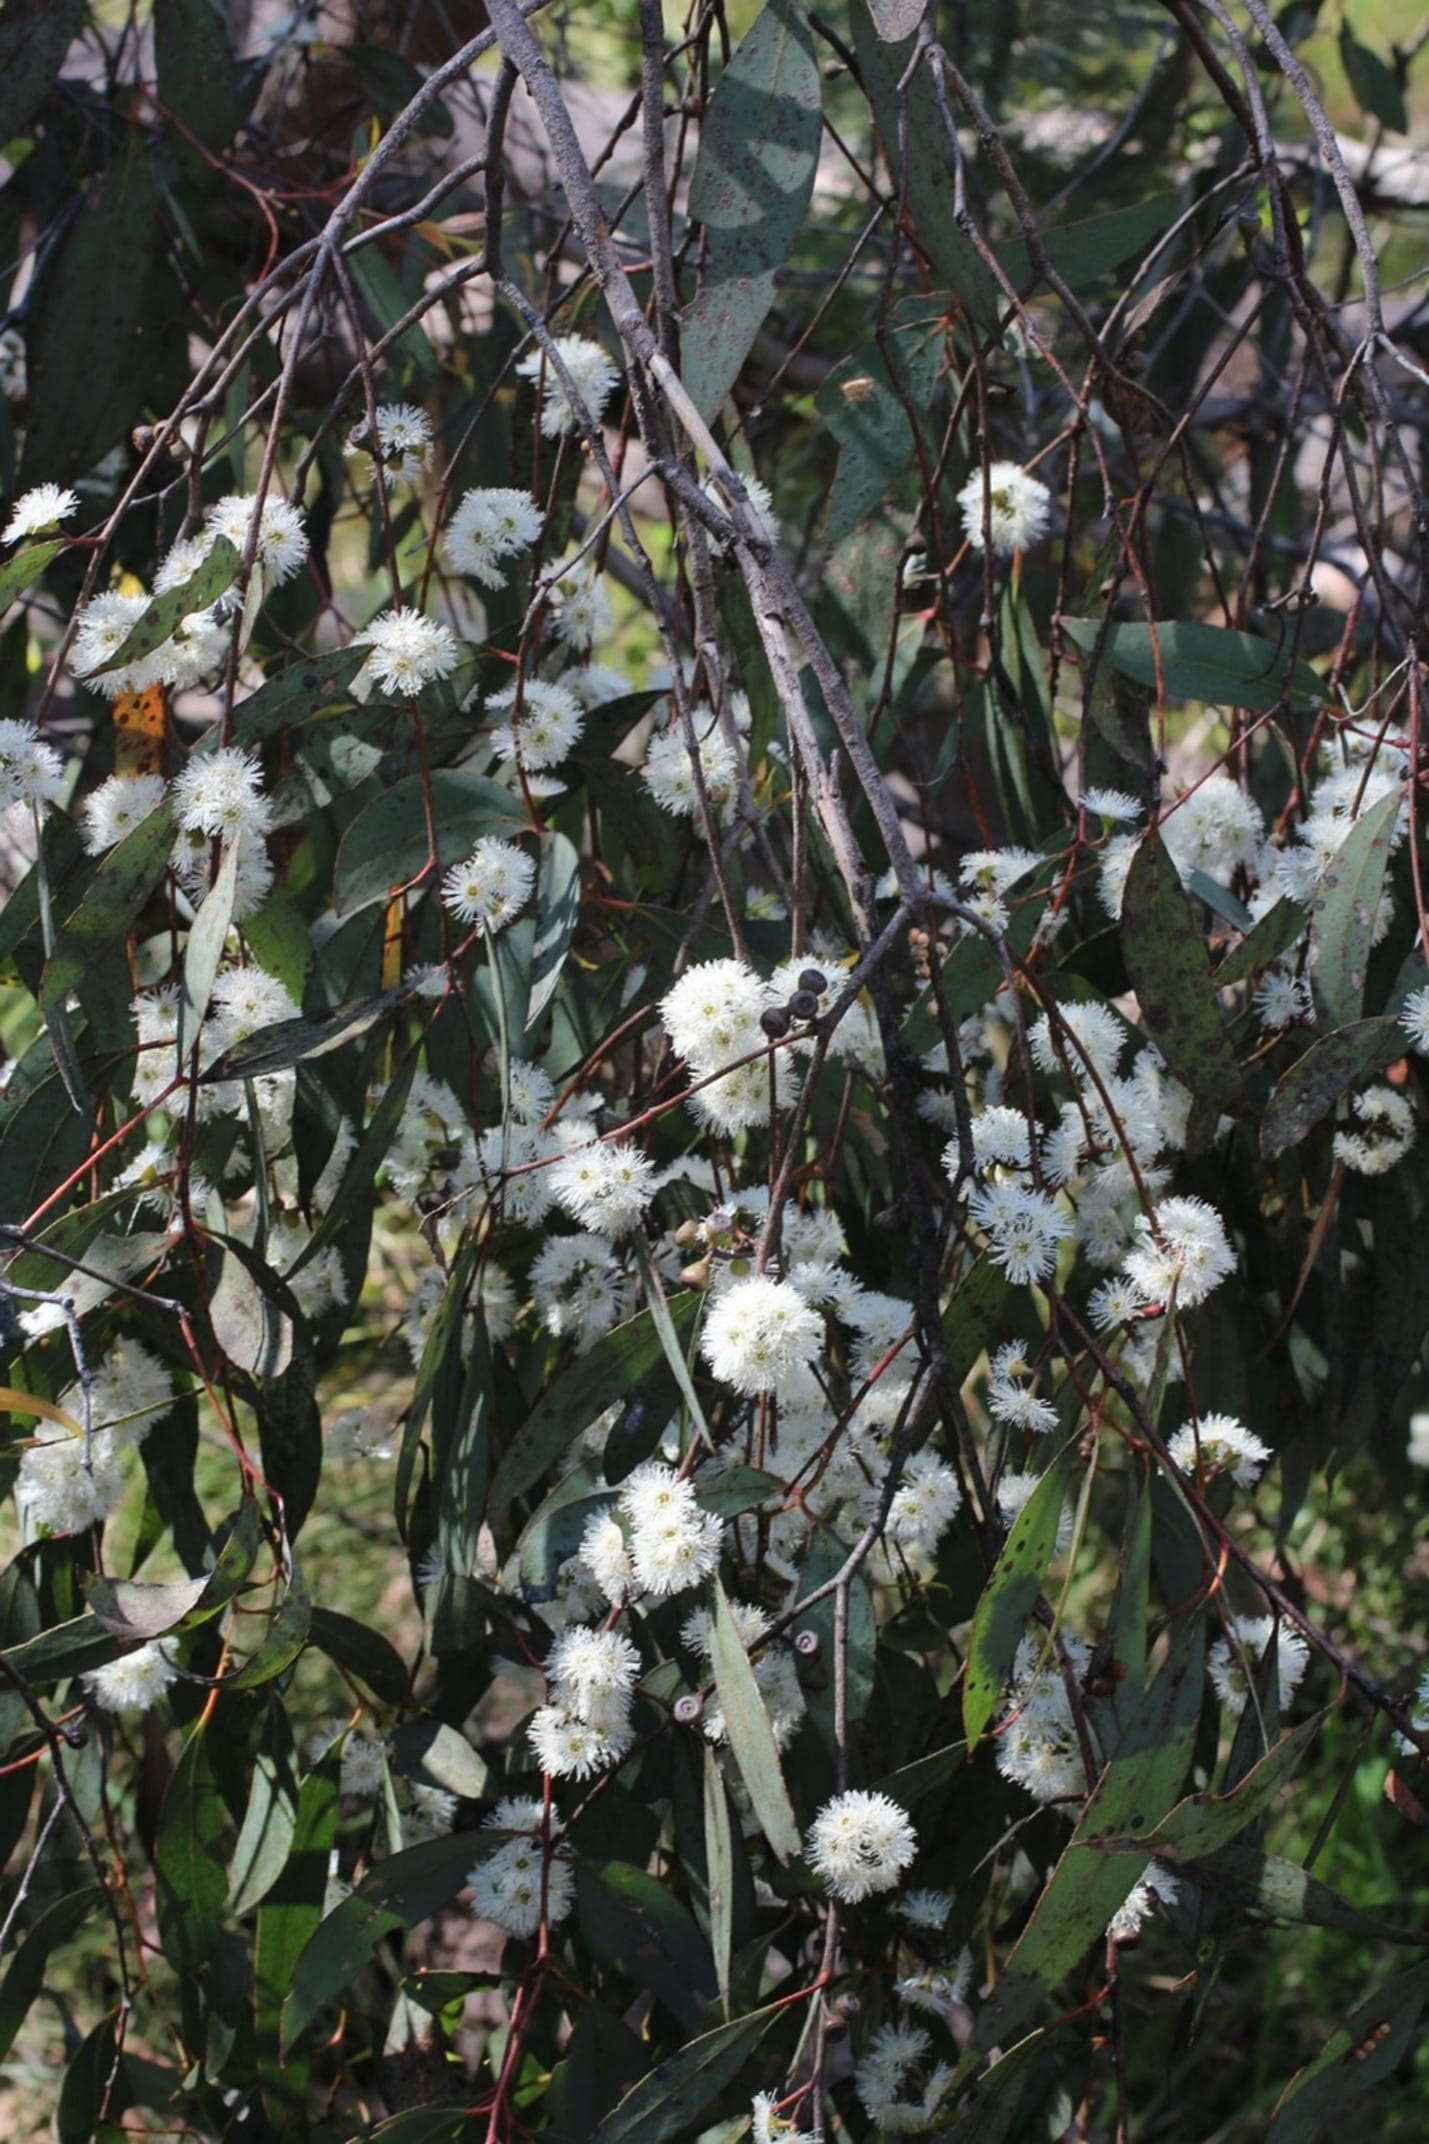 The flowers are a bright white colour amongst the dark green leaves